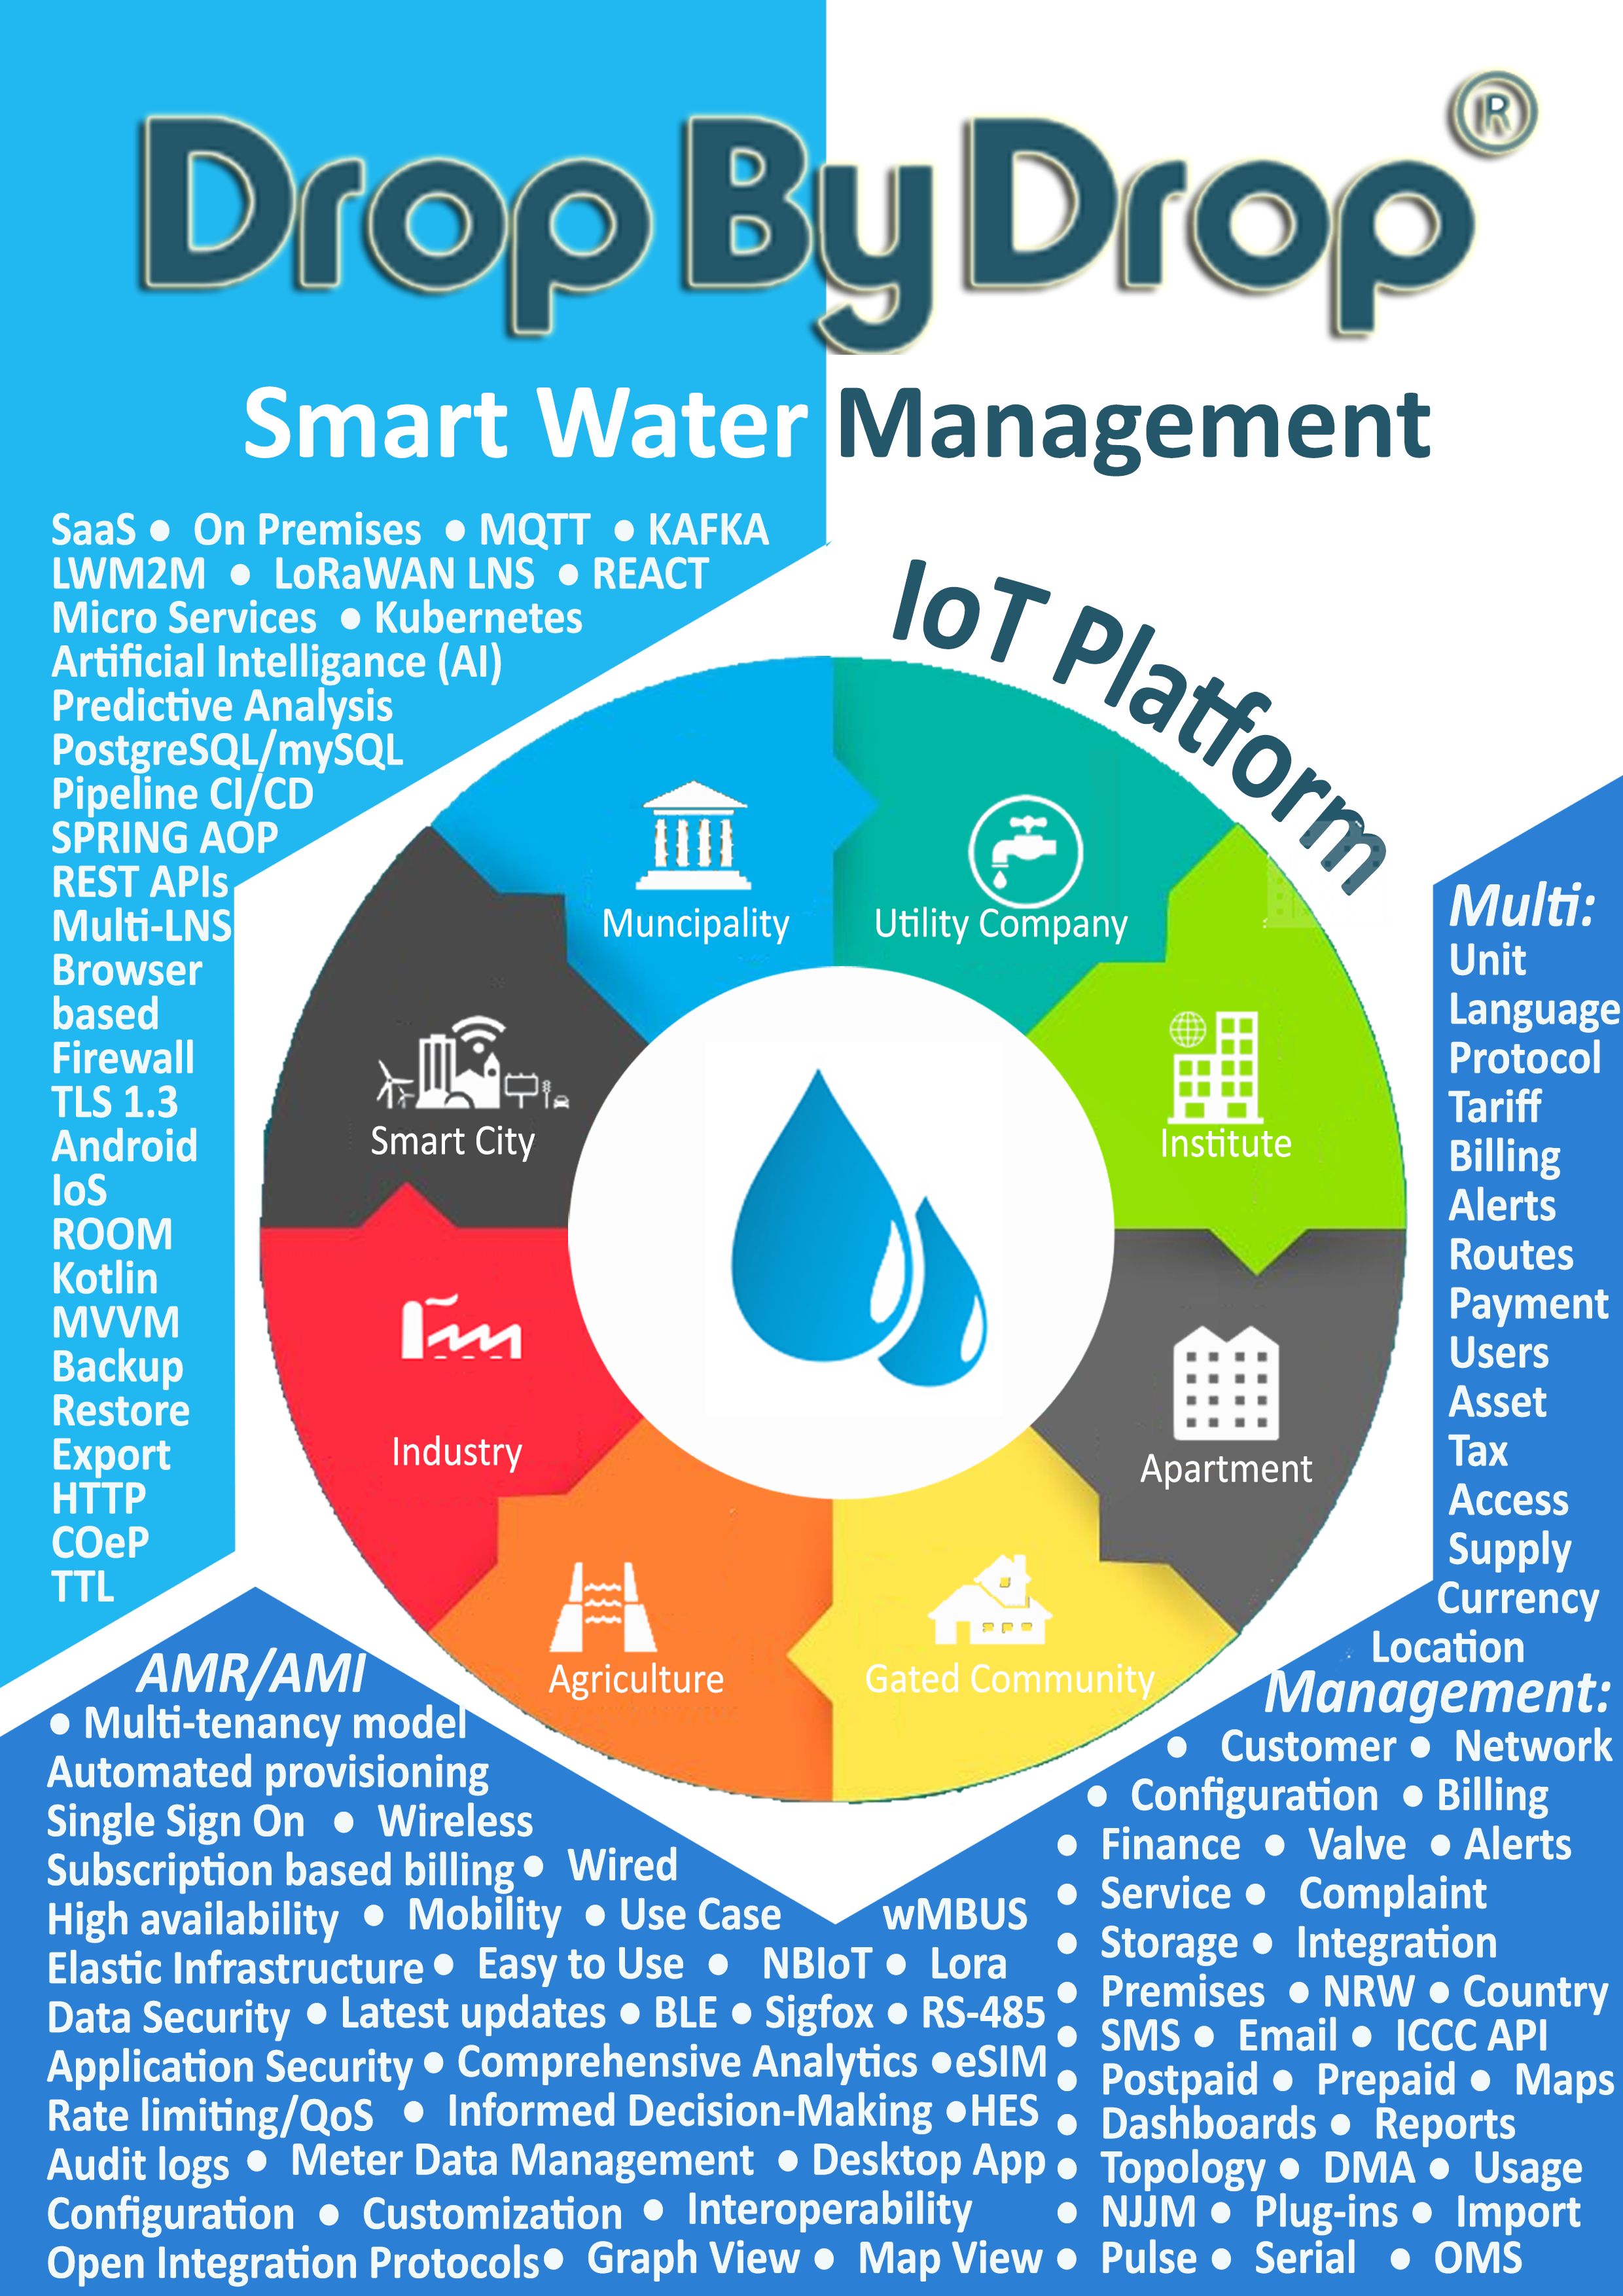 Smart Water Management for apartment